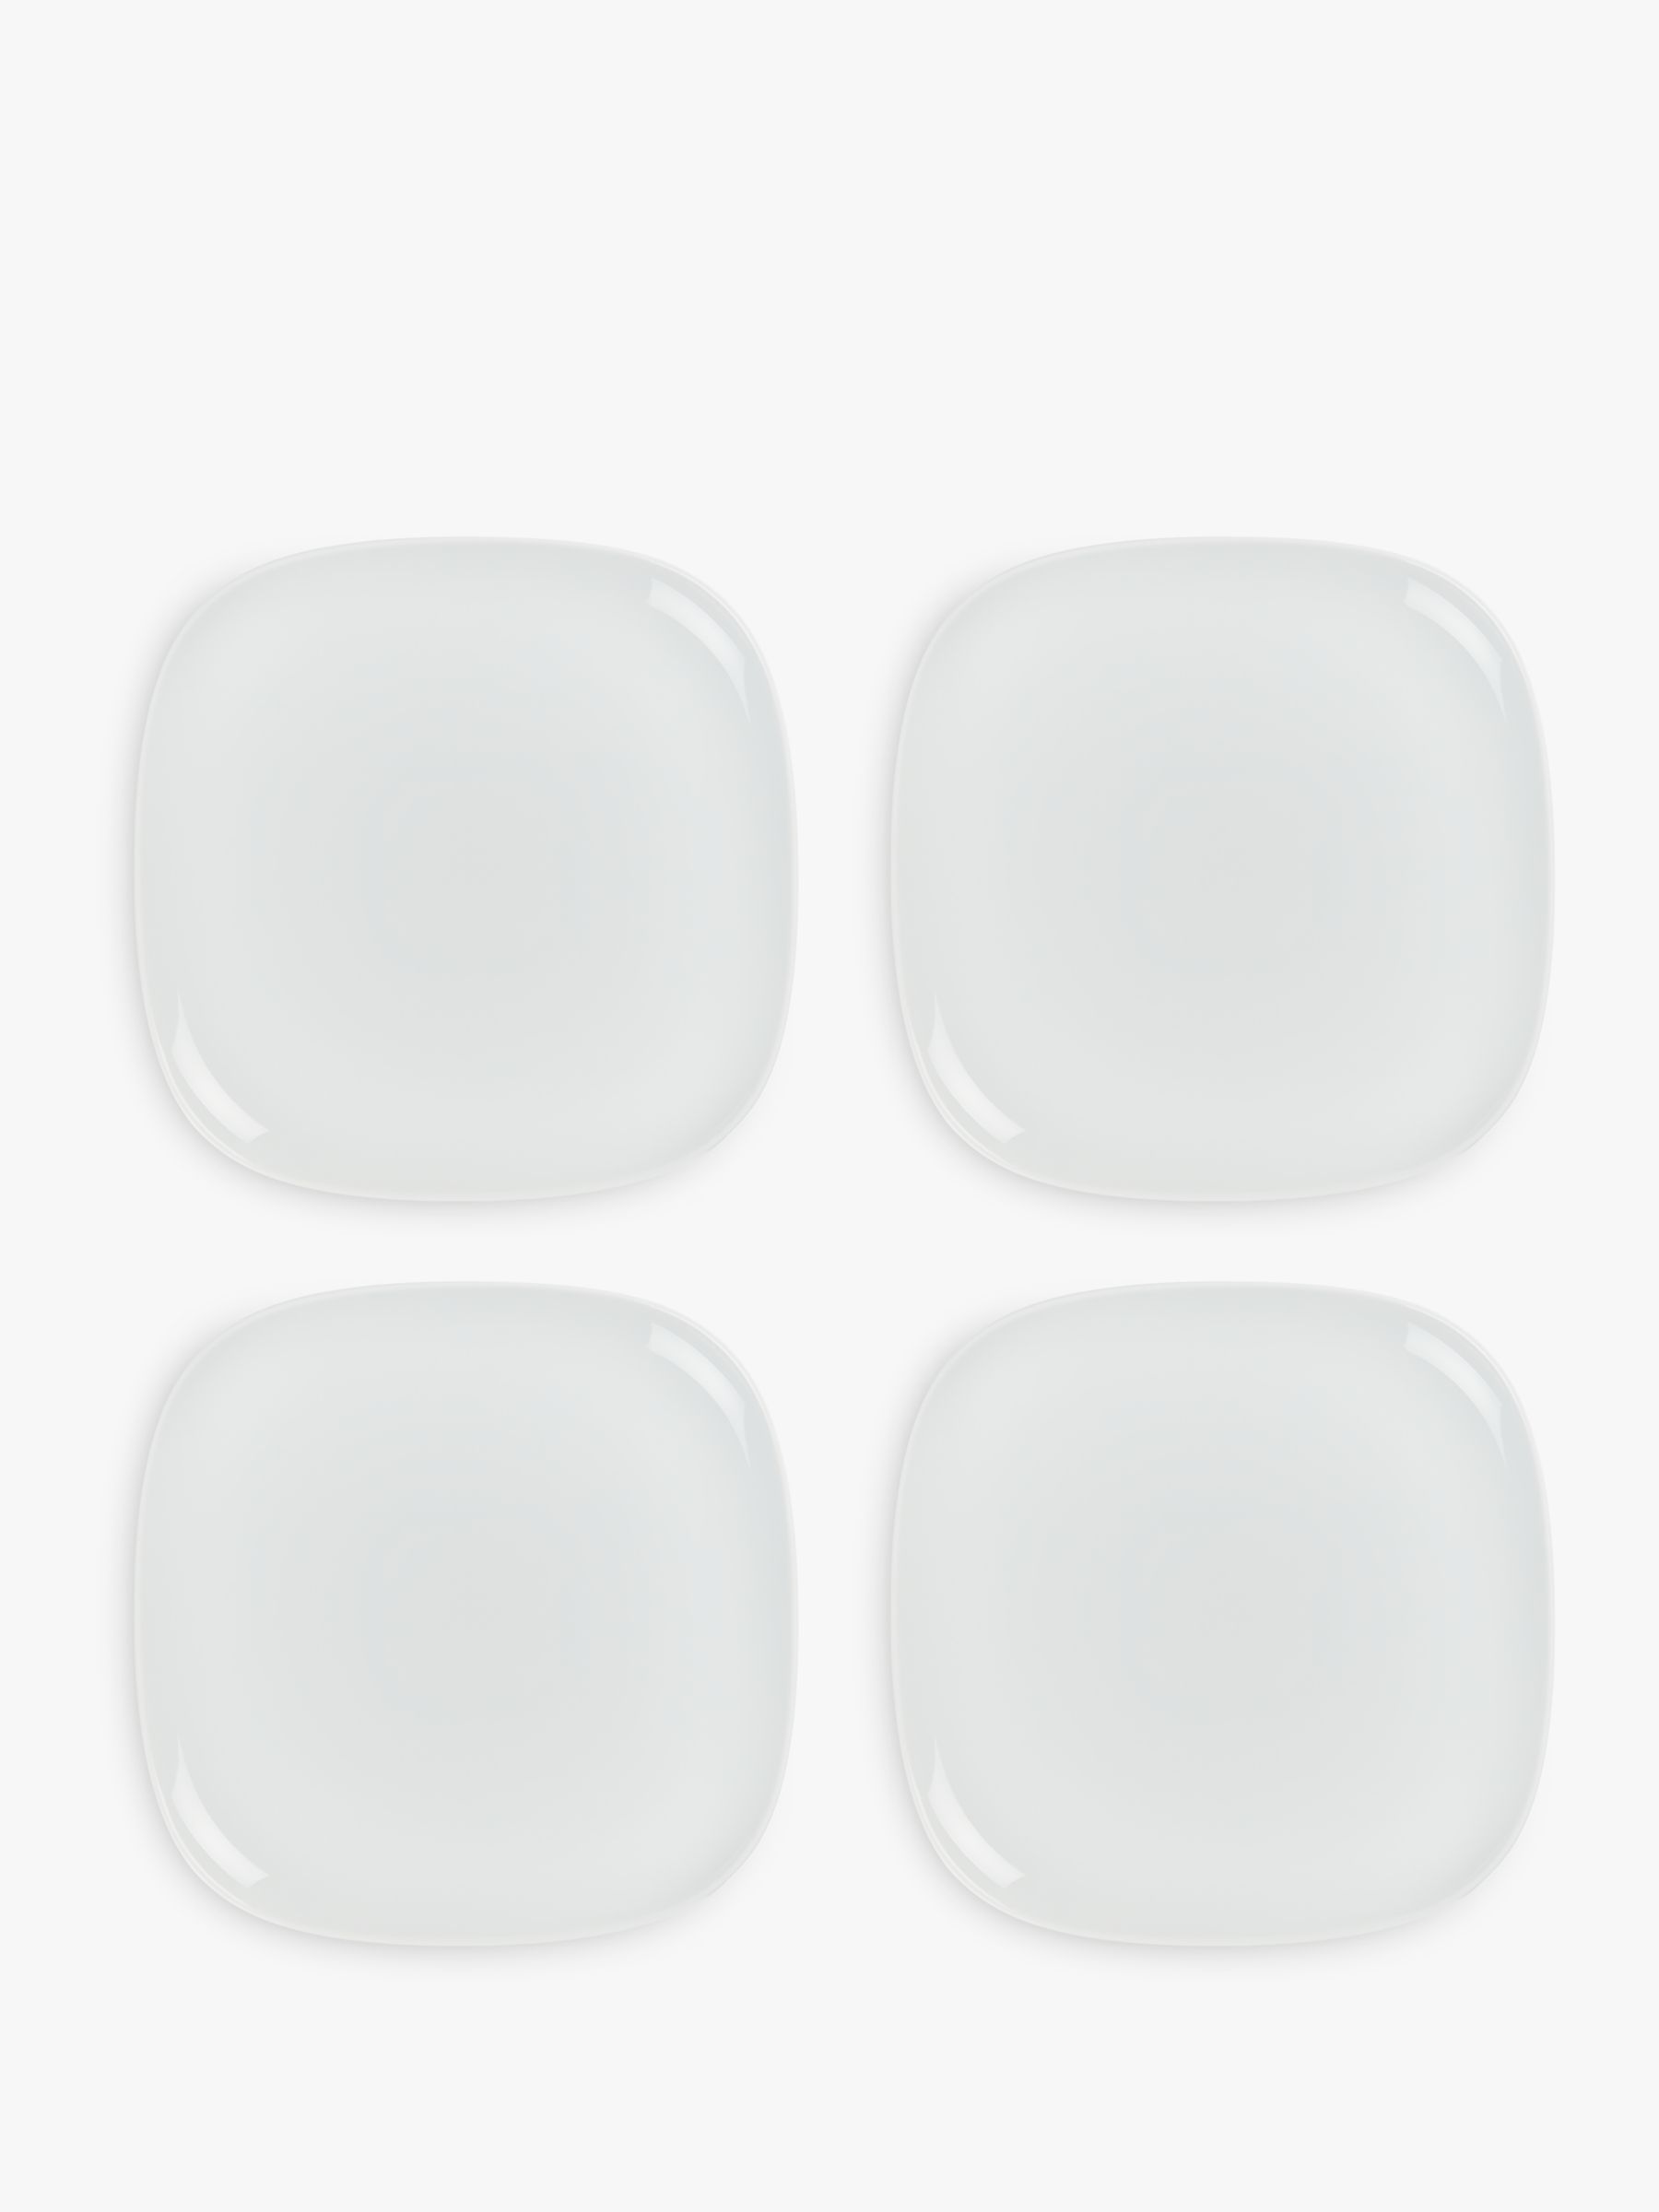 John Lewis ANYDAY Dine Square Side Plates, Set of 4, 16cm, White